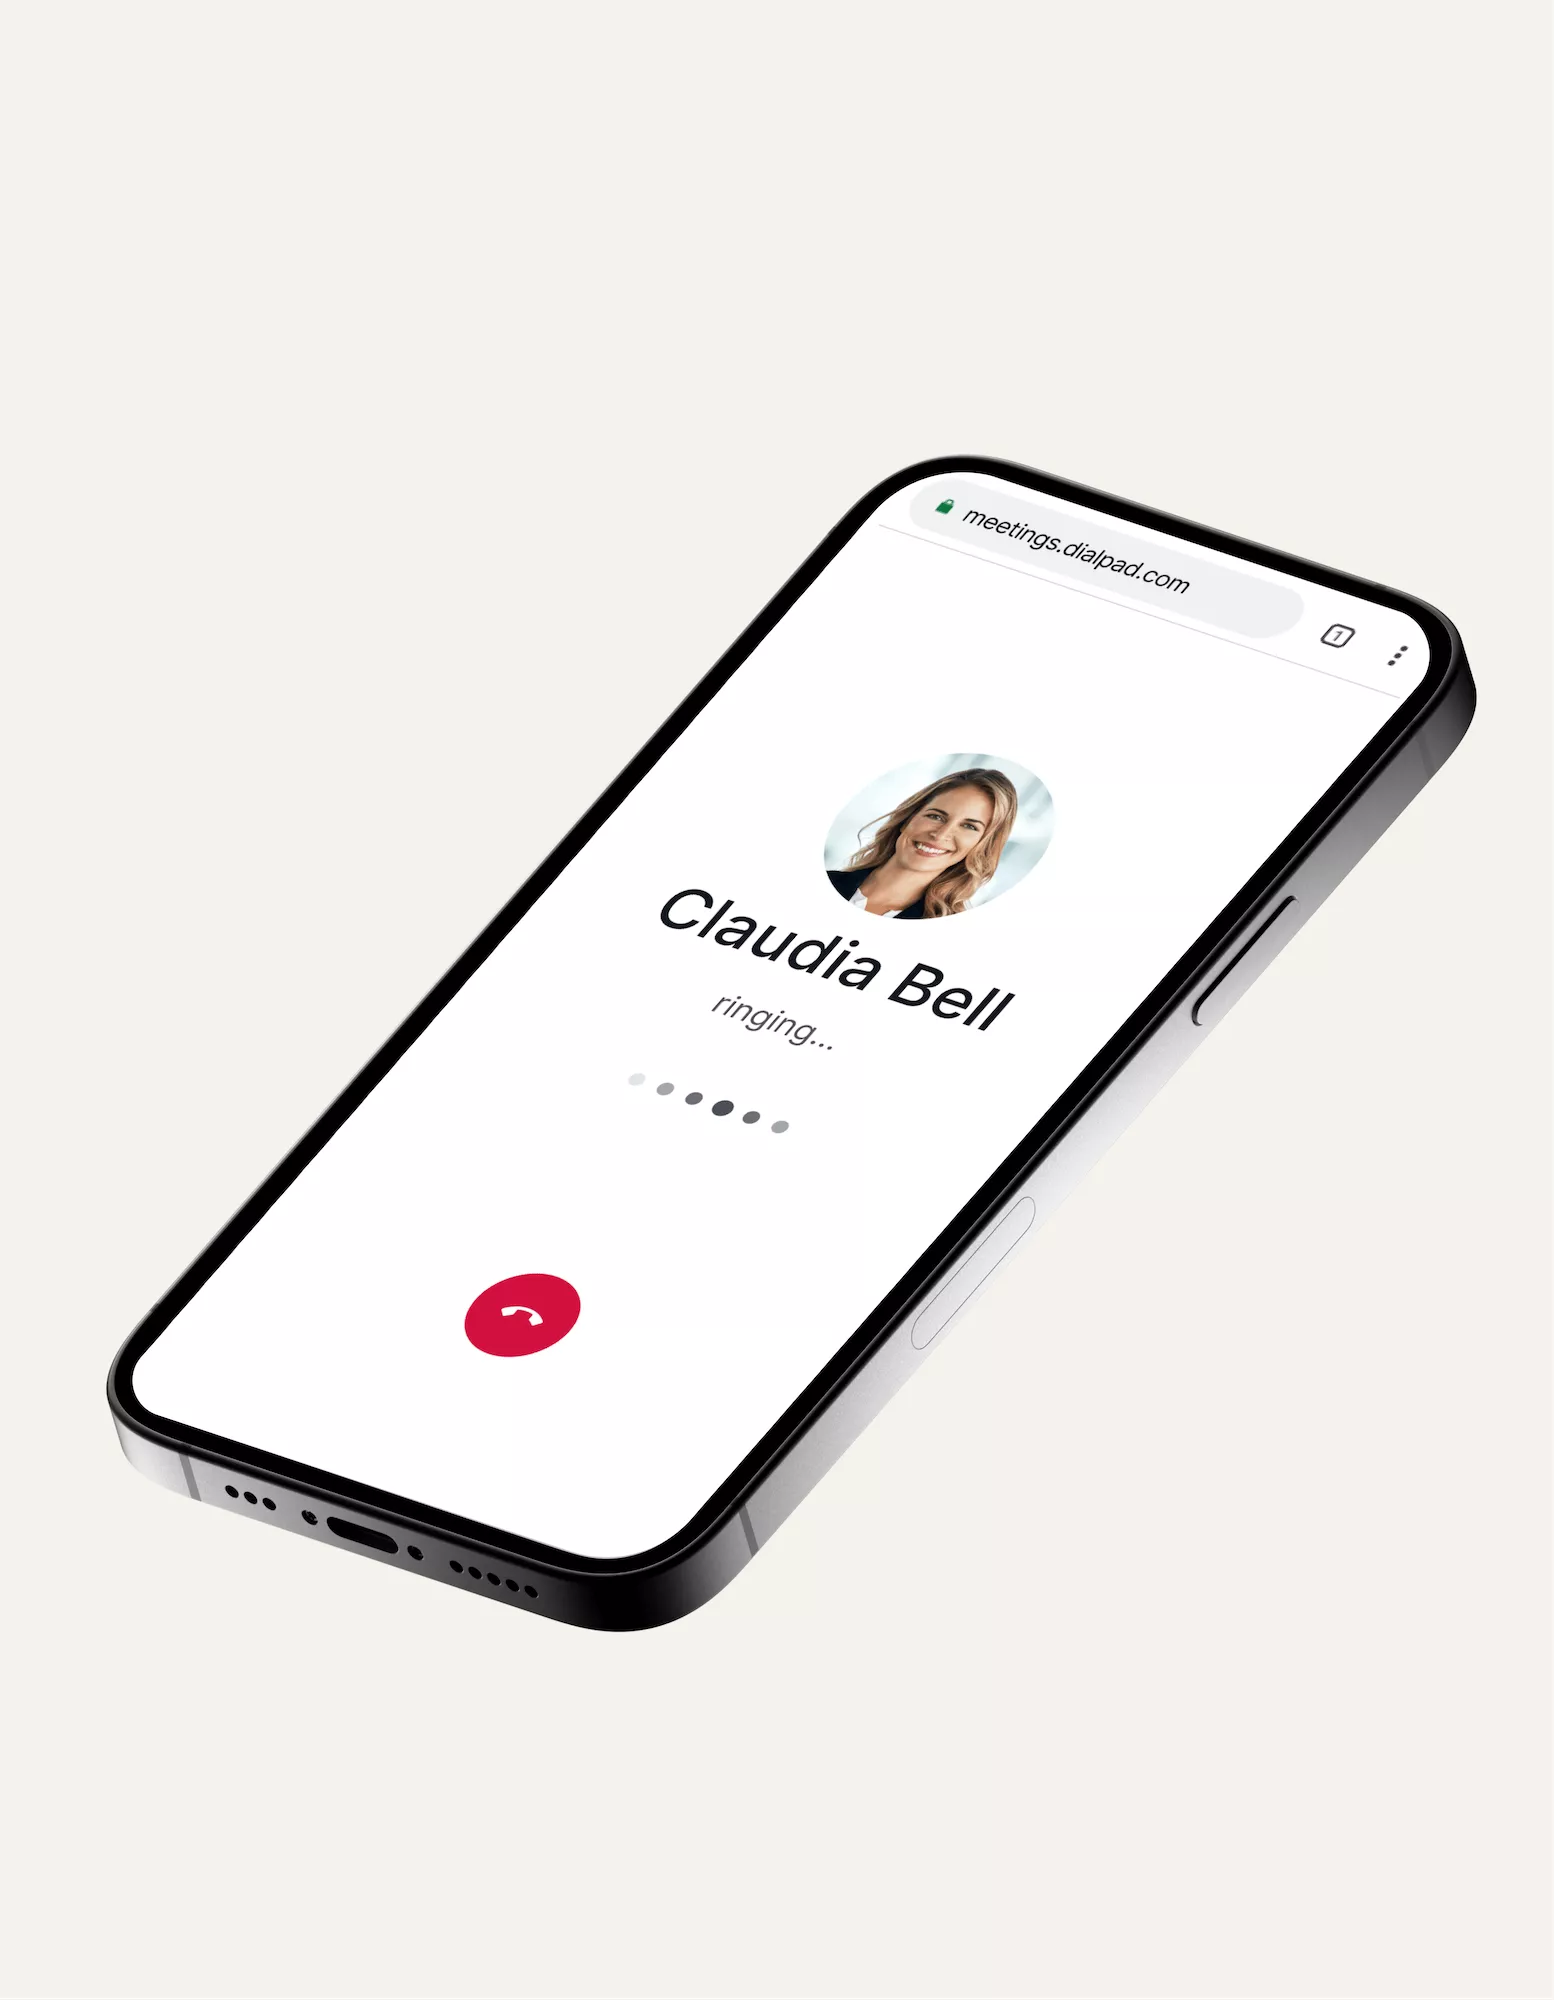 Mobile phone showing a phone call being made from a web browser using Dialpad